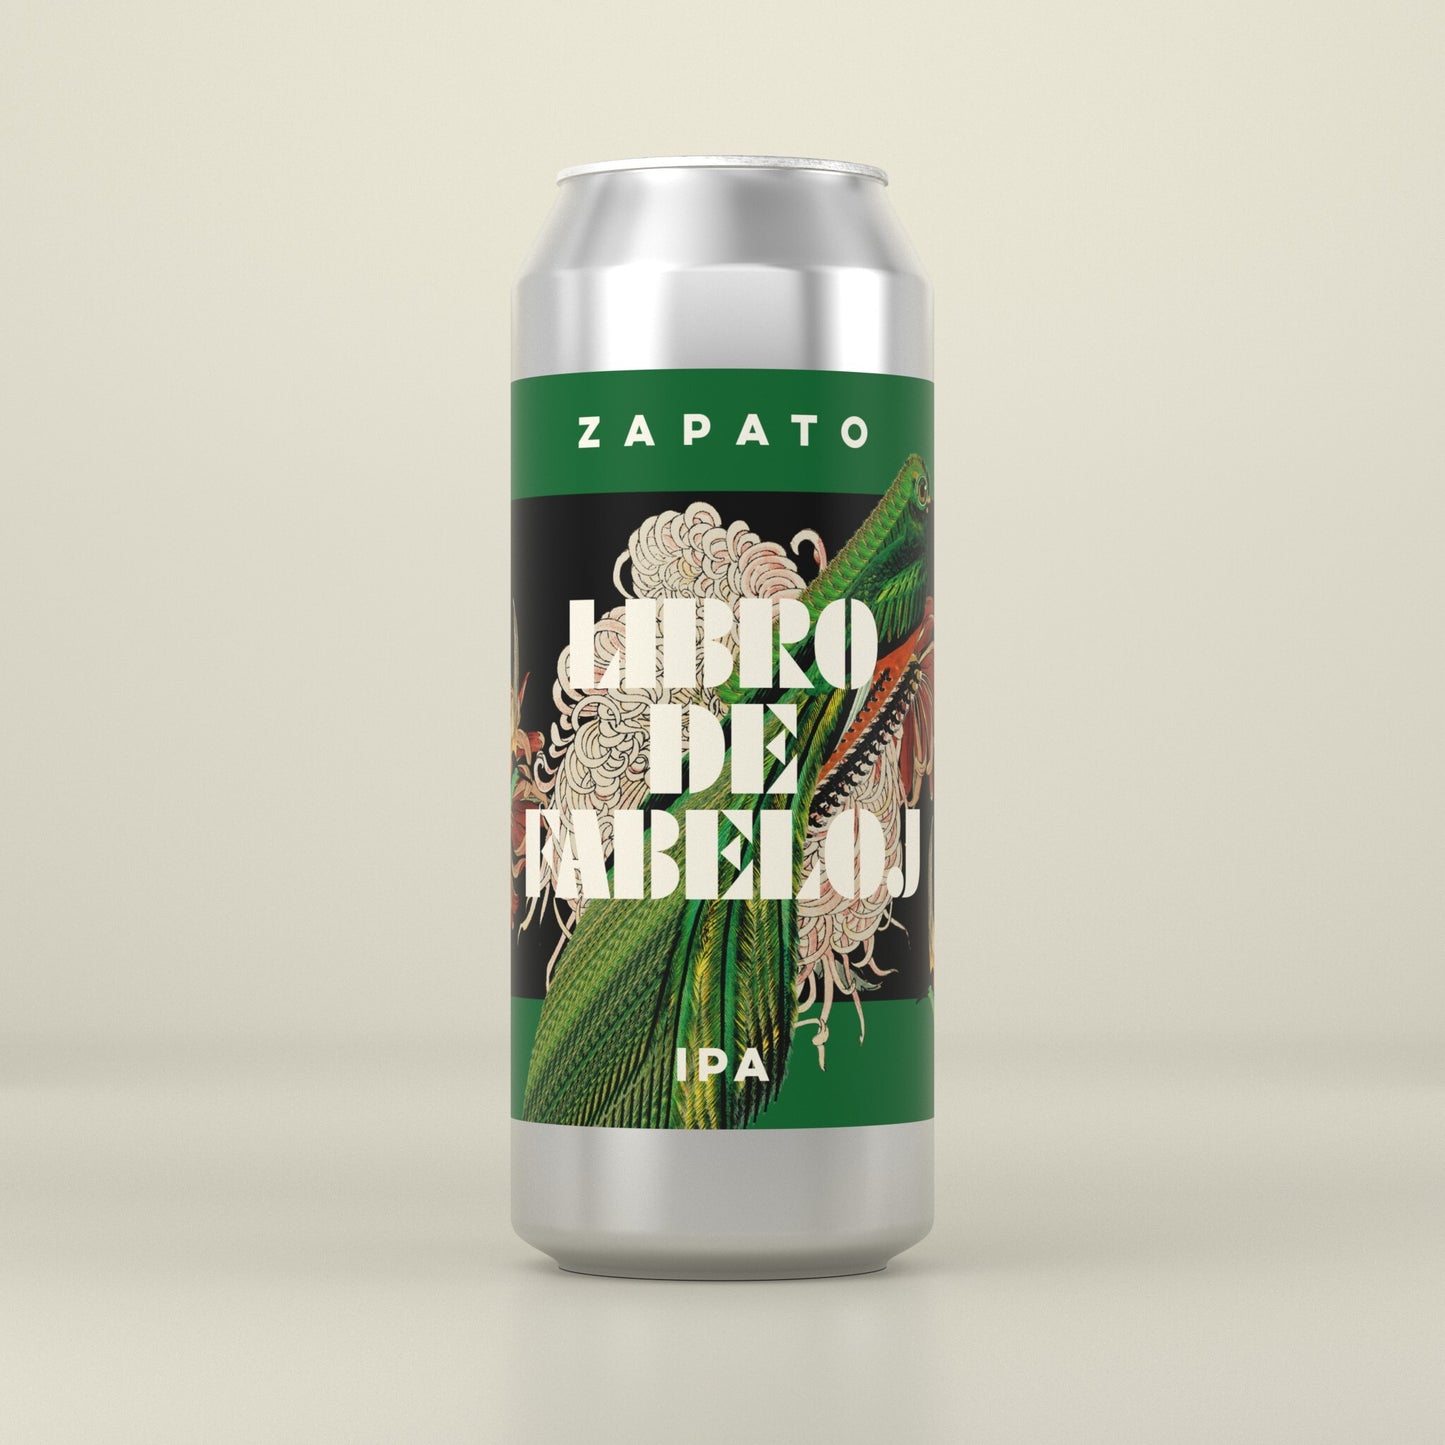 Mixed IPA + Pale Launch Pack